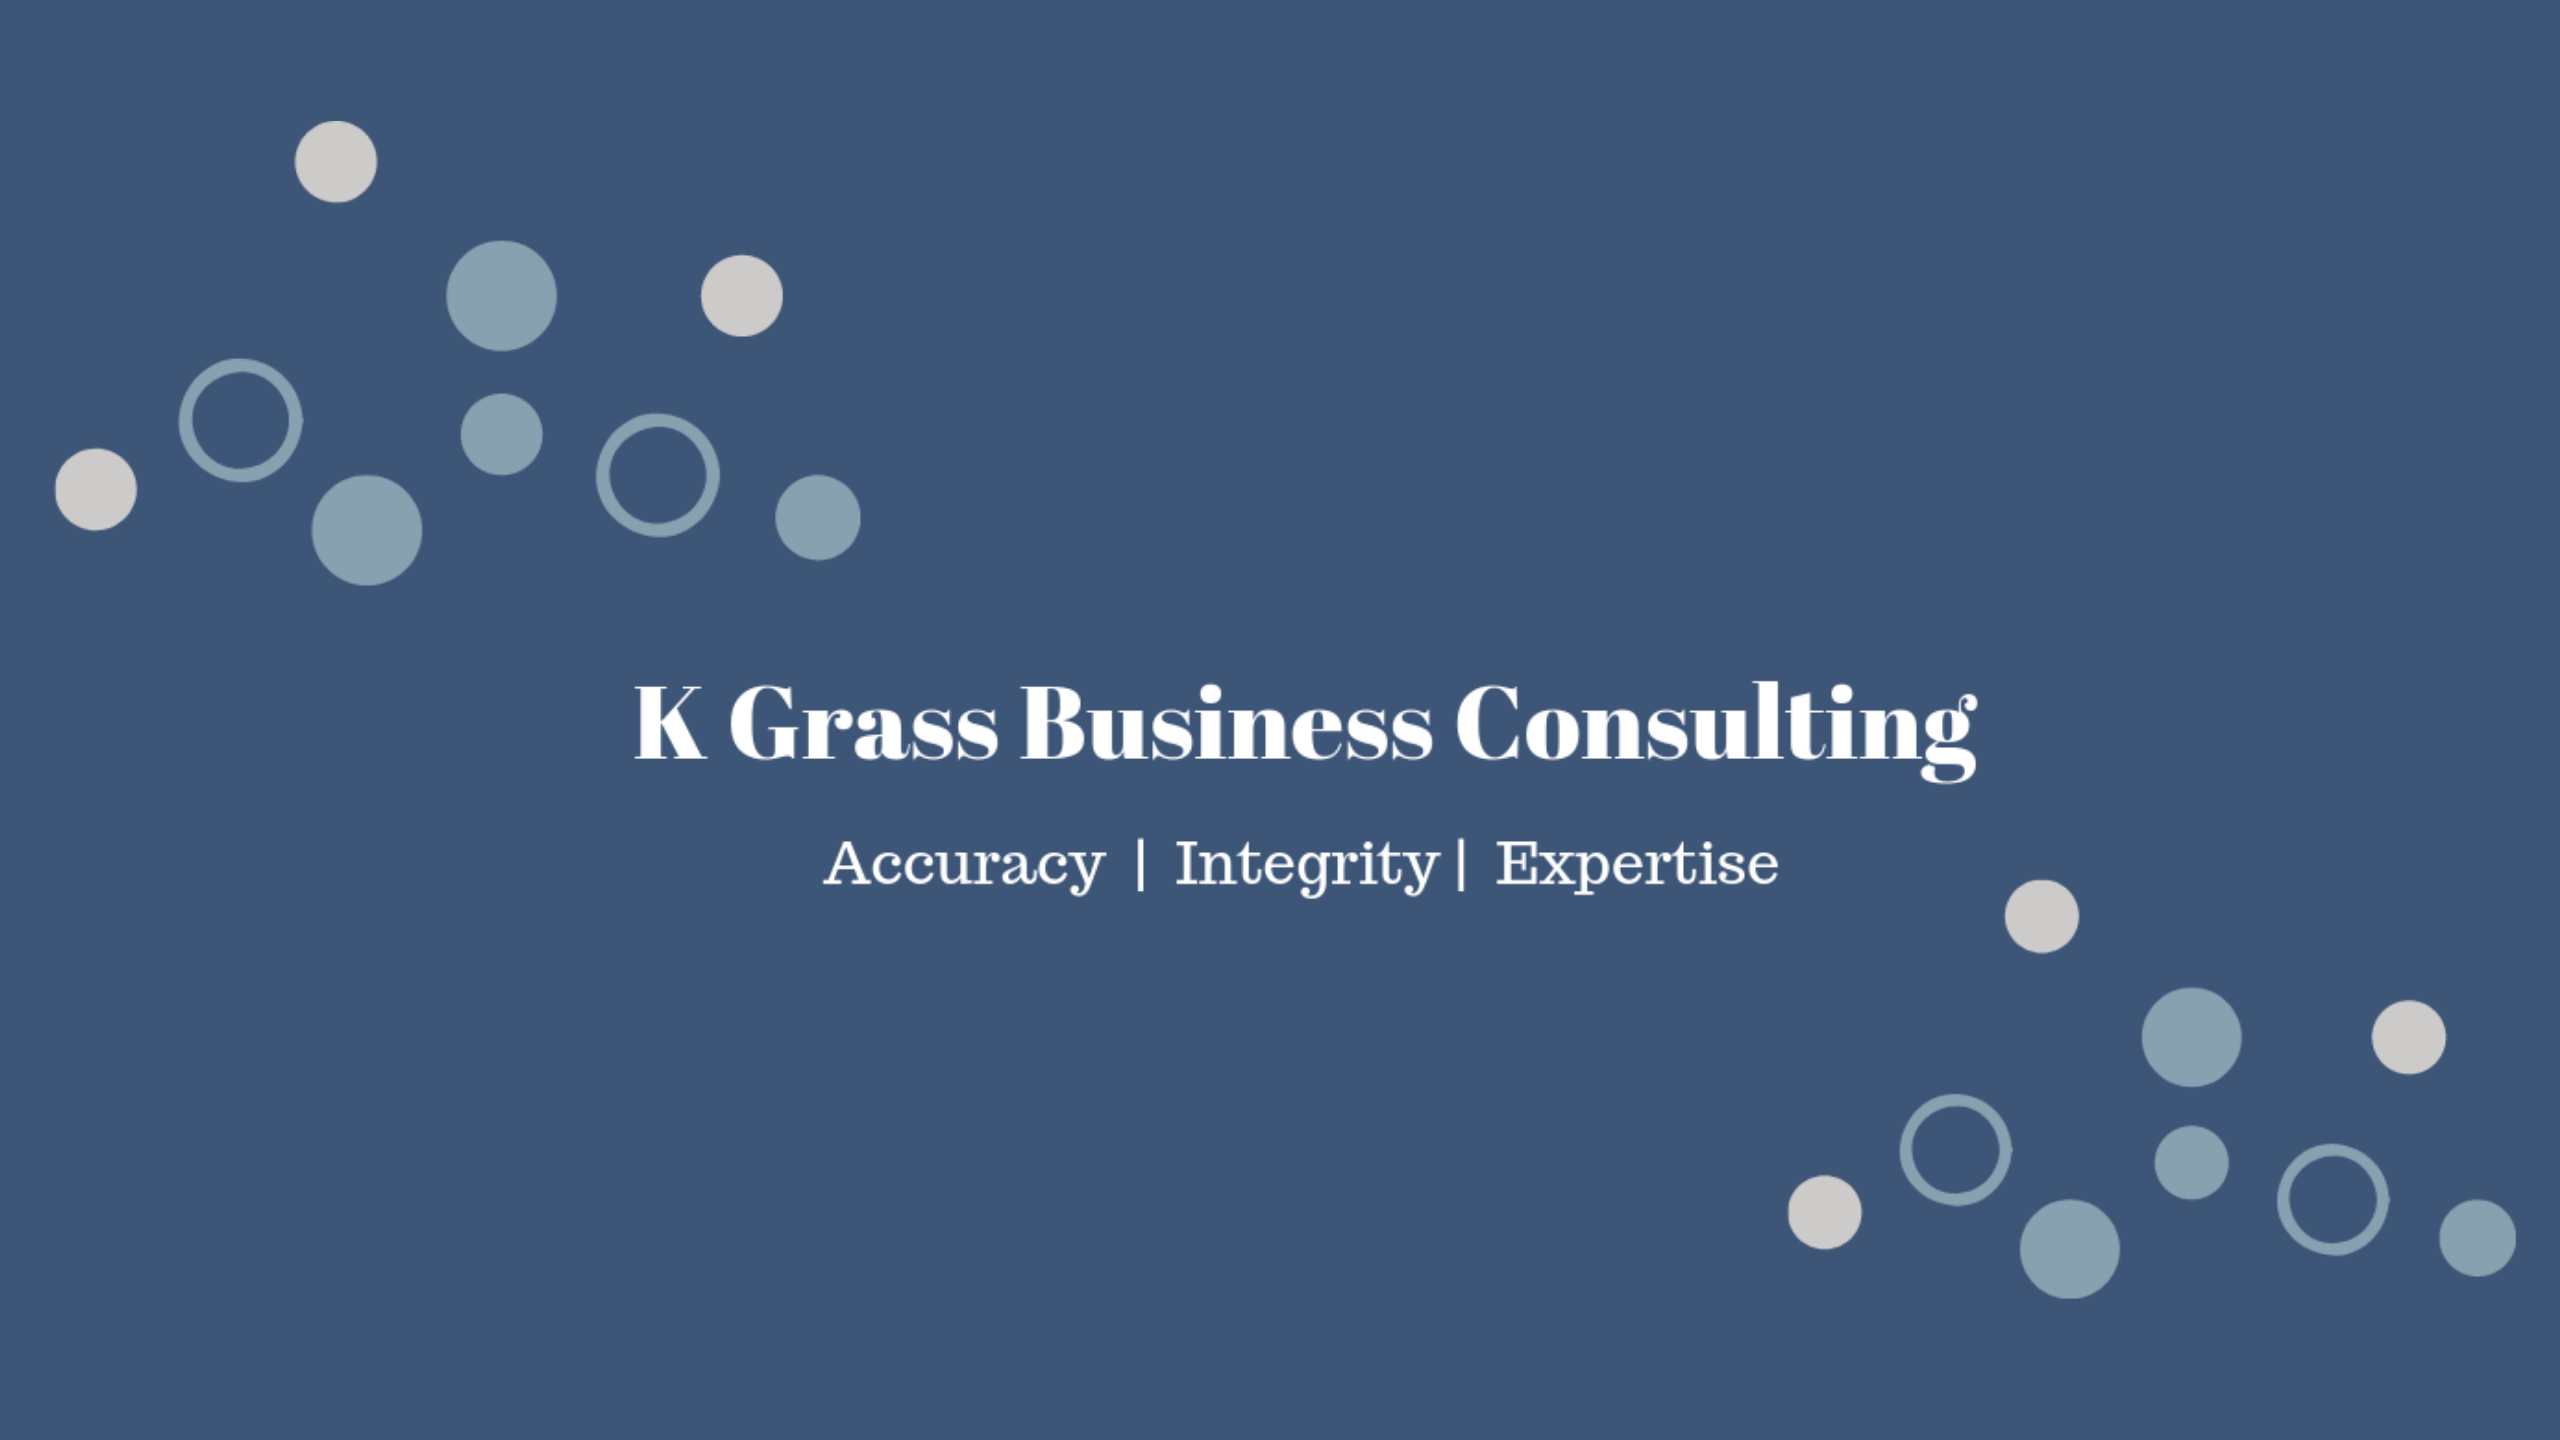 K Grass Business Consulting